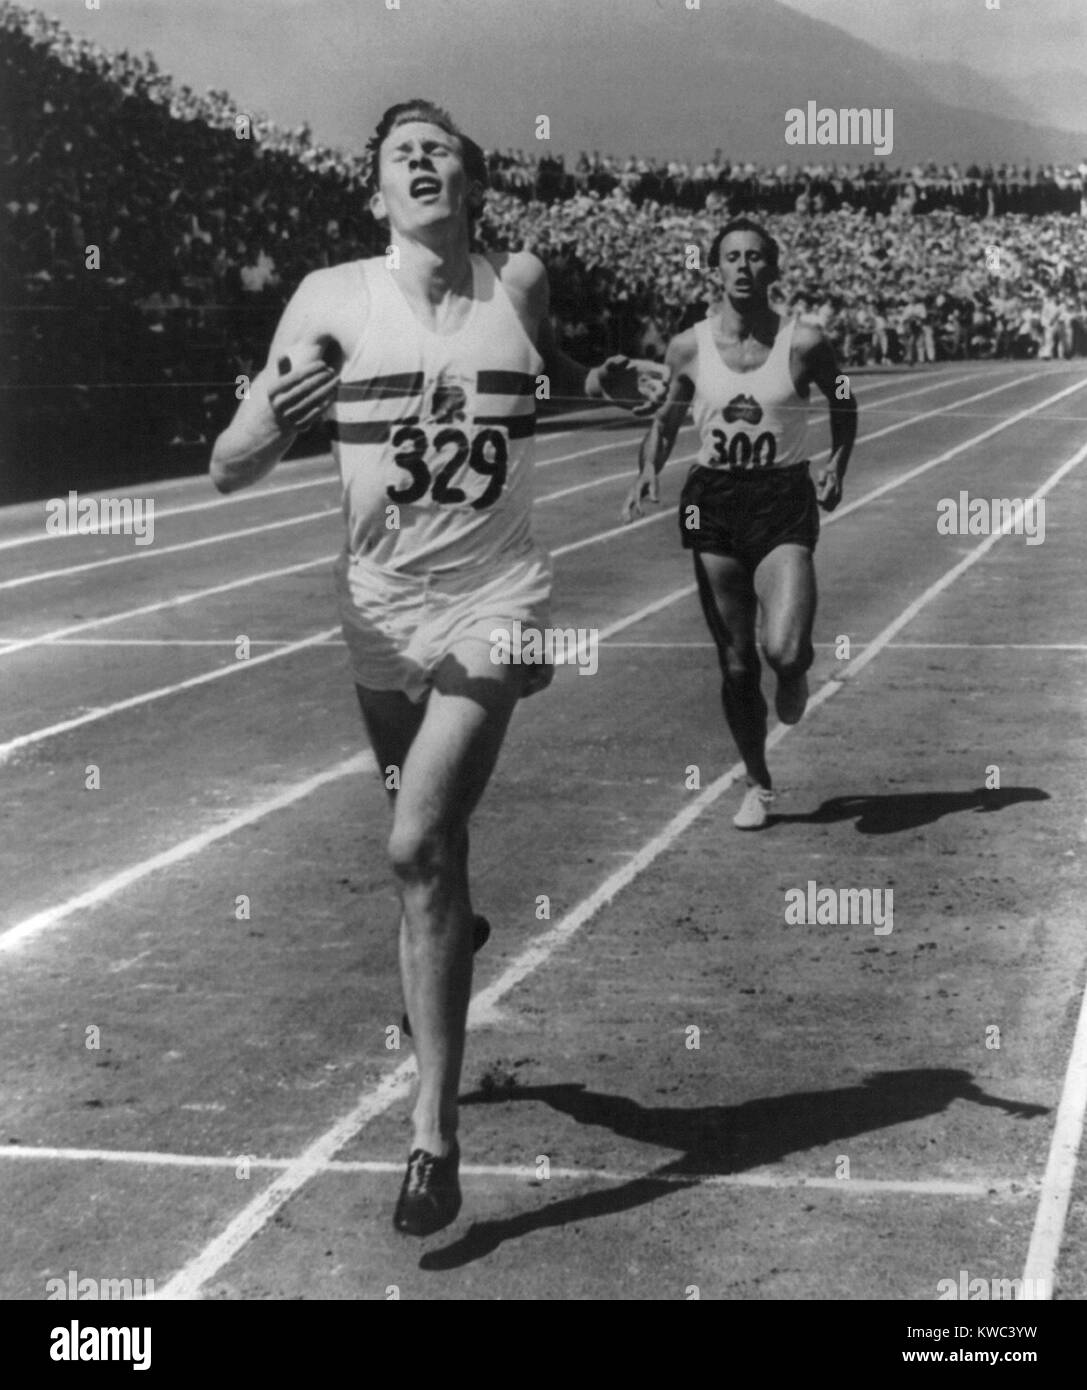 Roger Bannister leads John Landy of Australia across the finish line at British Empire Games, 1954. It was the first mile race in history in which two runners finished under four minutes. Vancouver, B.C. (BSLOC 2015 14 218) Stock Photo